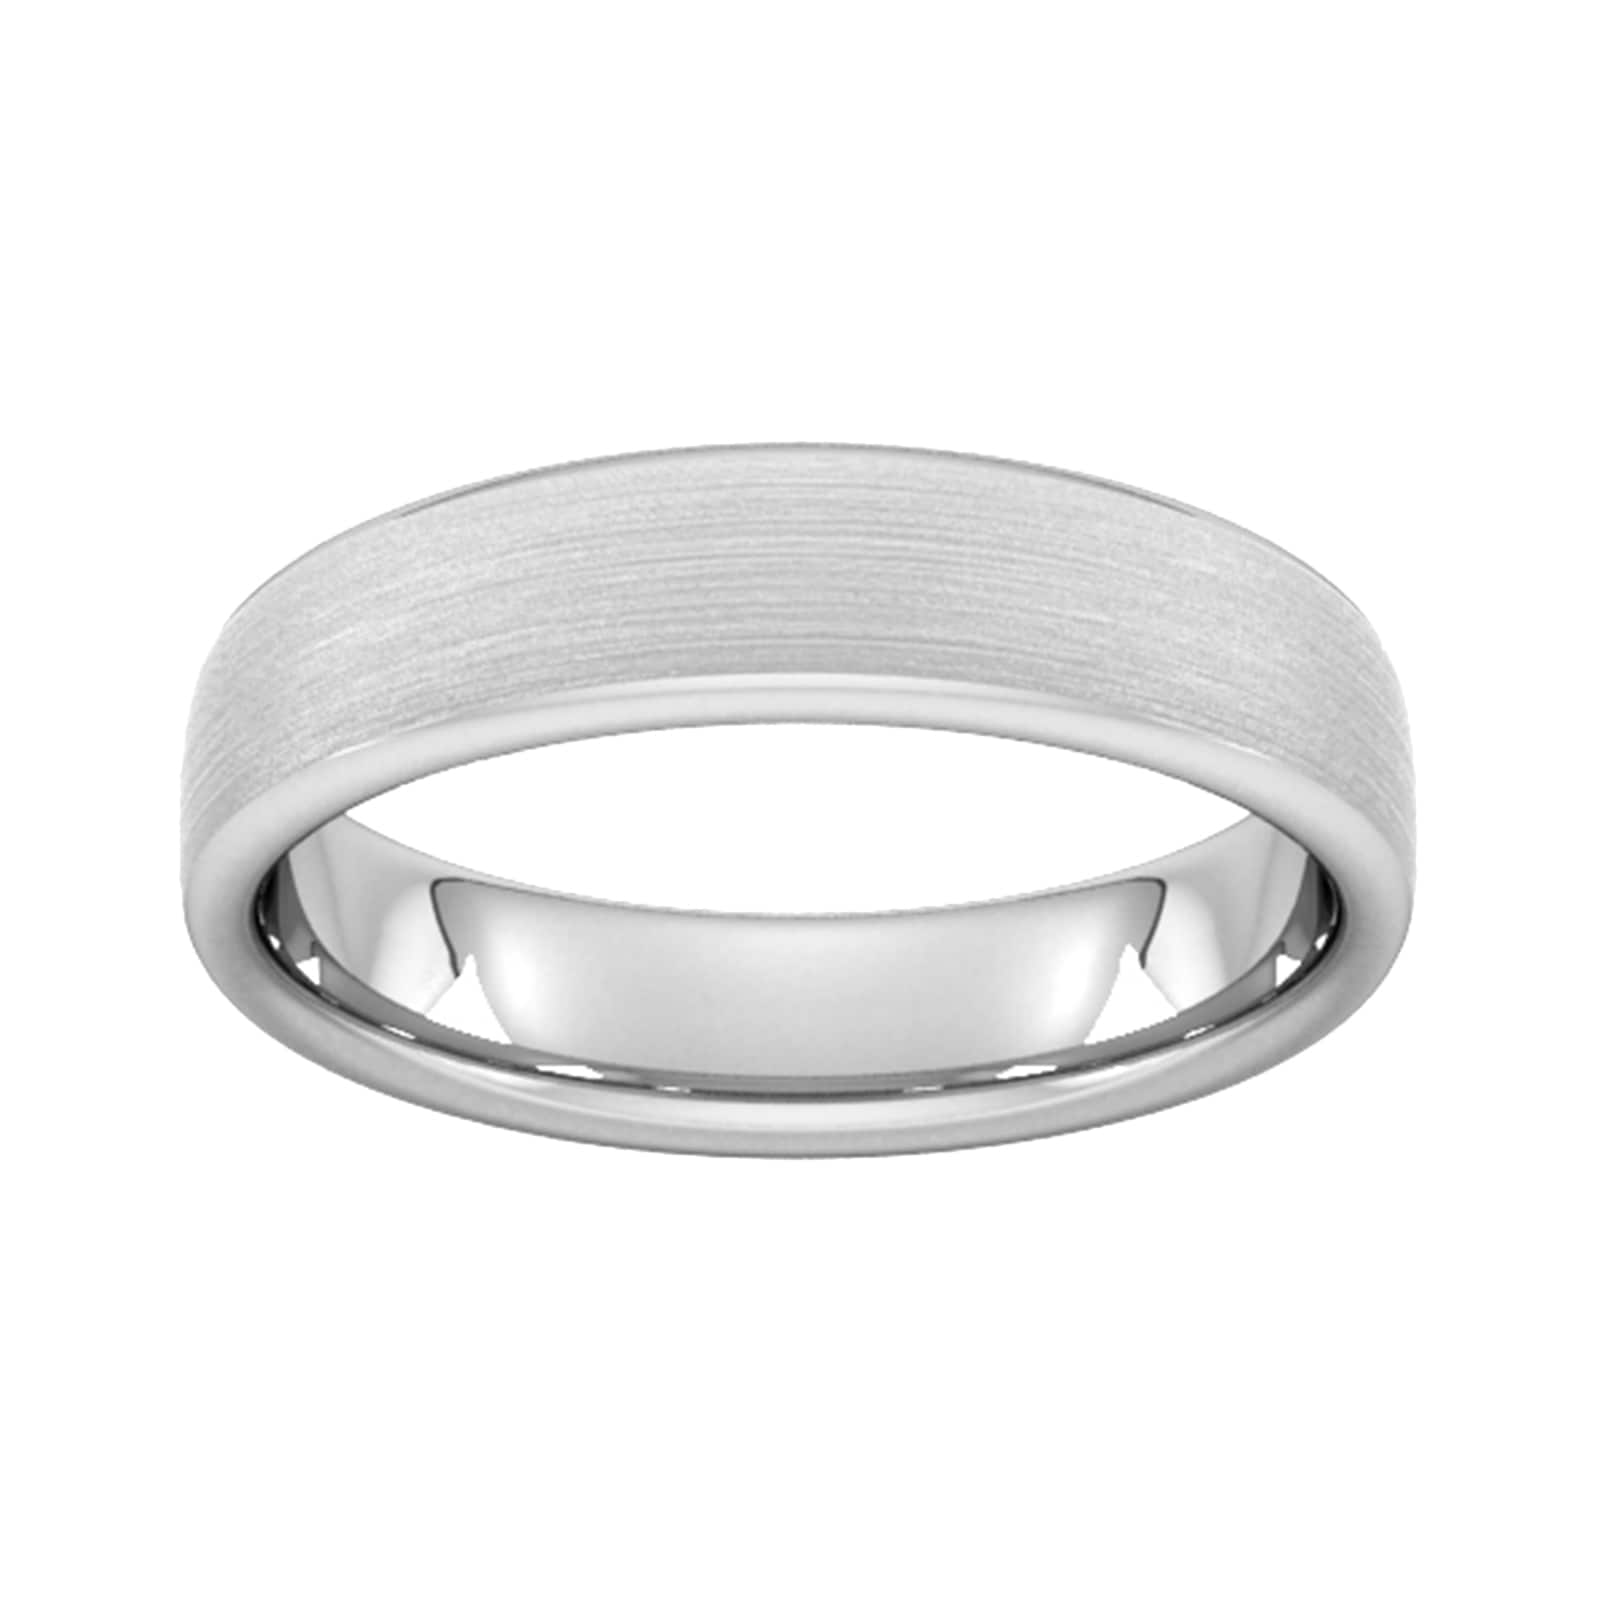 5mm Traditional Court Standard Matt Finished Wedding Ring In 9 Carat White Gold - Ring Size K